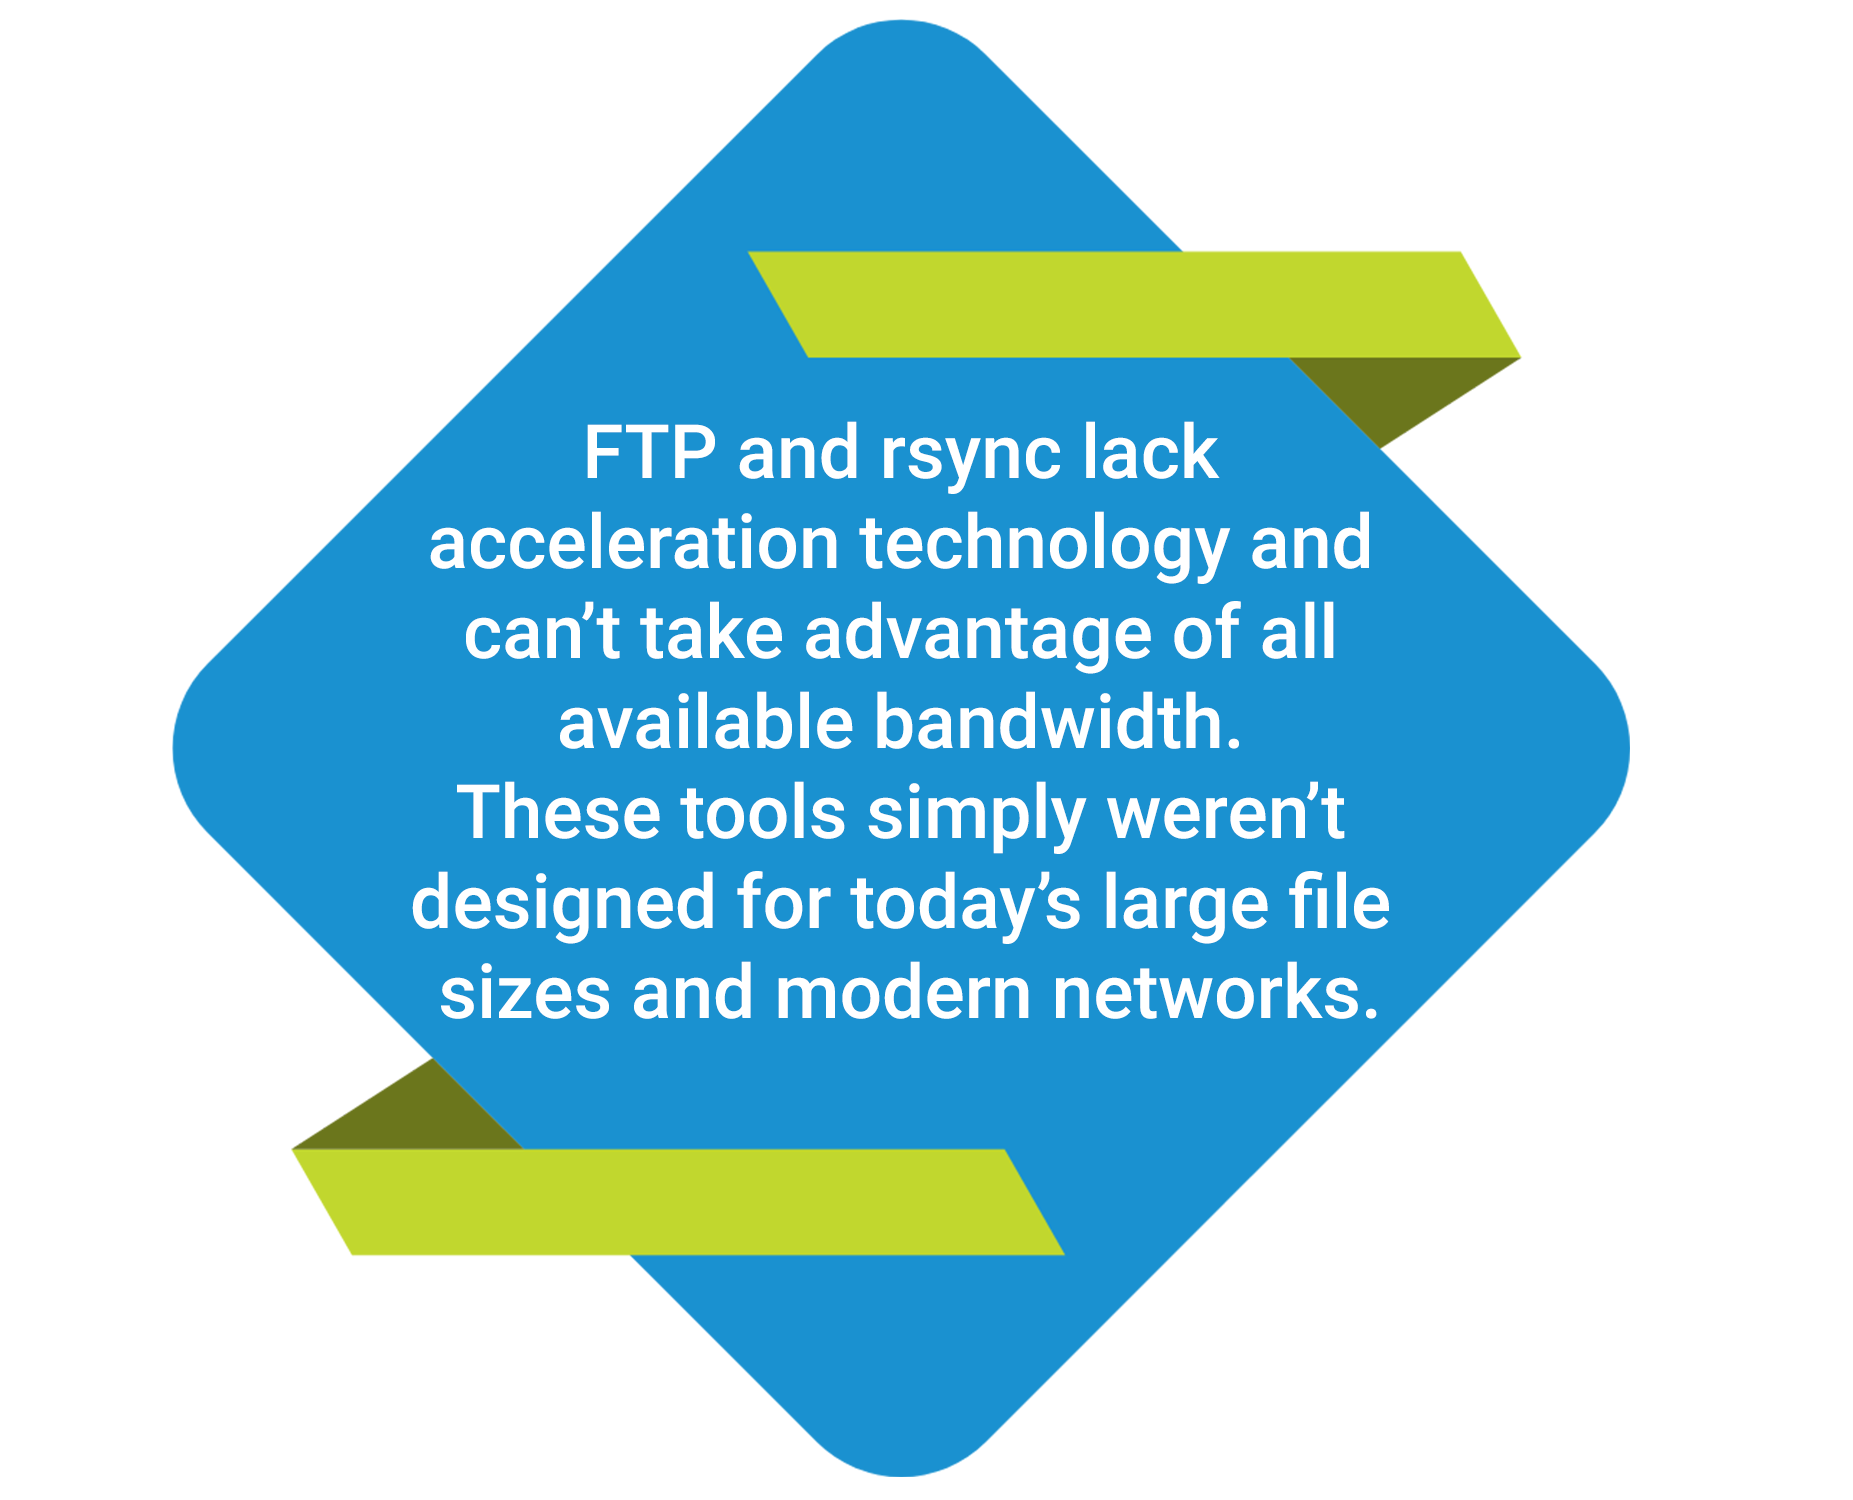 FTP and rsync lack acceleration technology and can't take advantage of all available bandwidth.